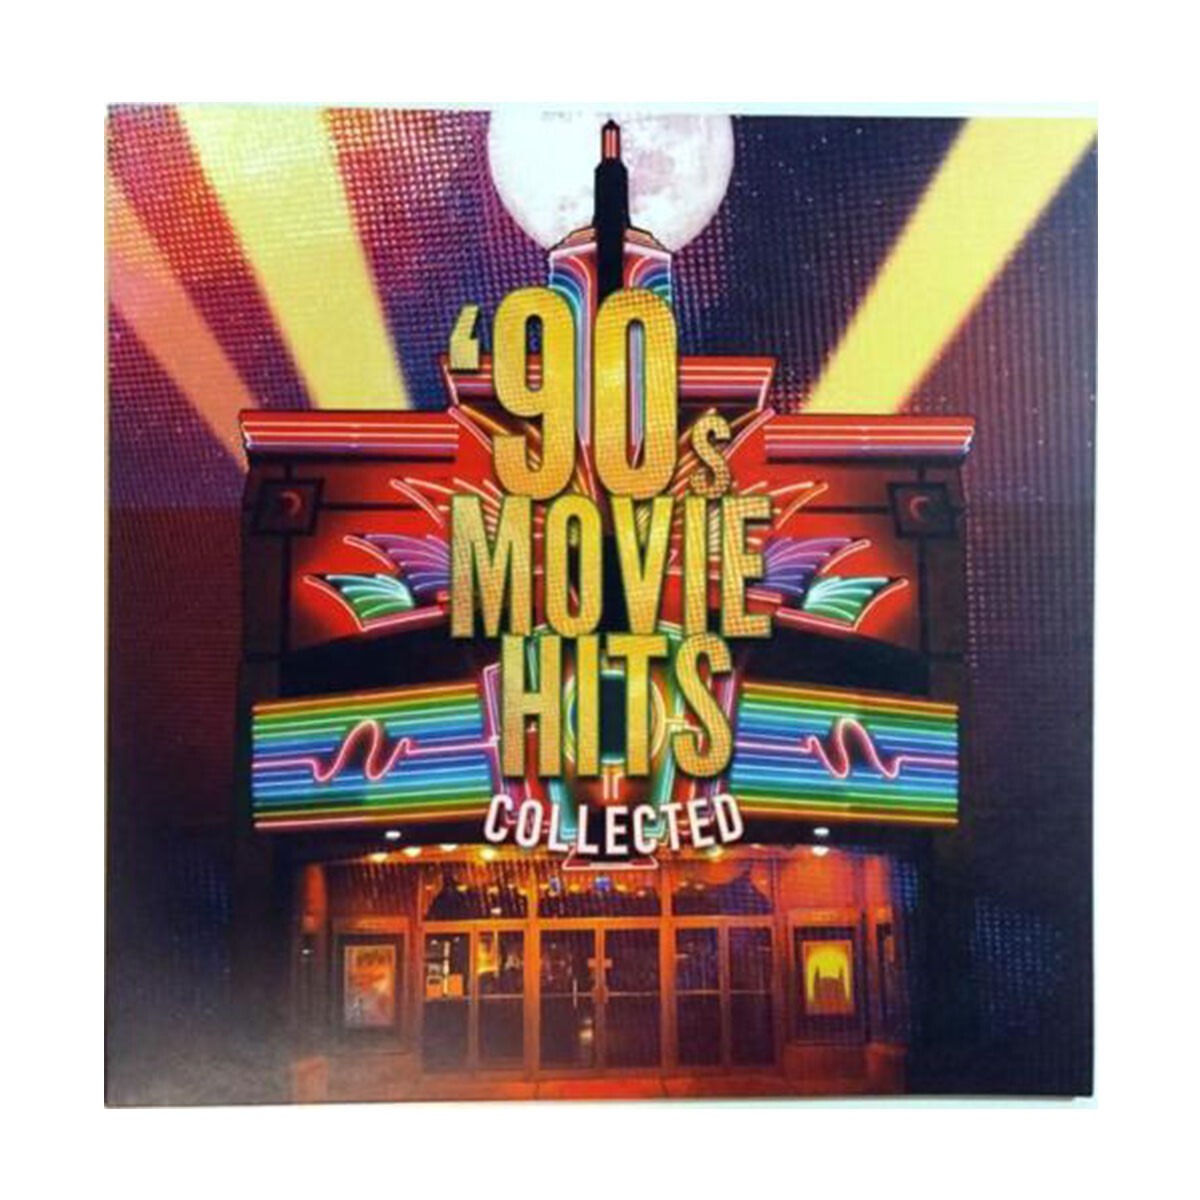 90's Movie Hits Collected / Various - Vinilo 